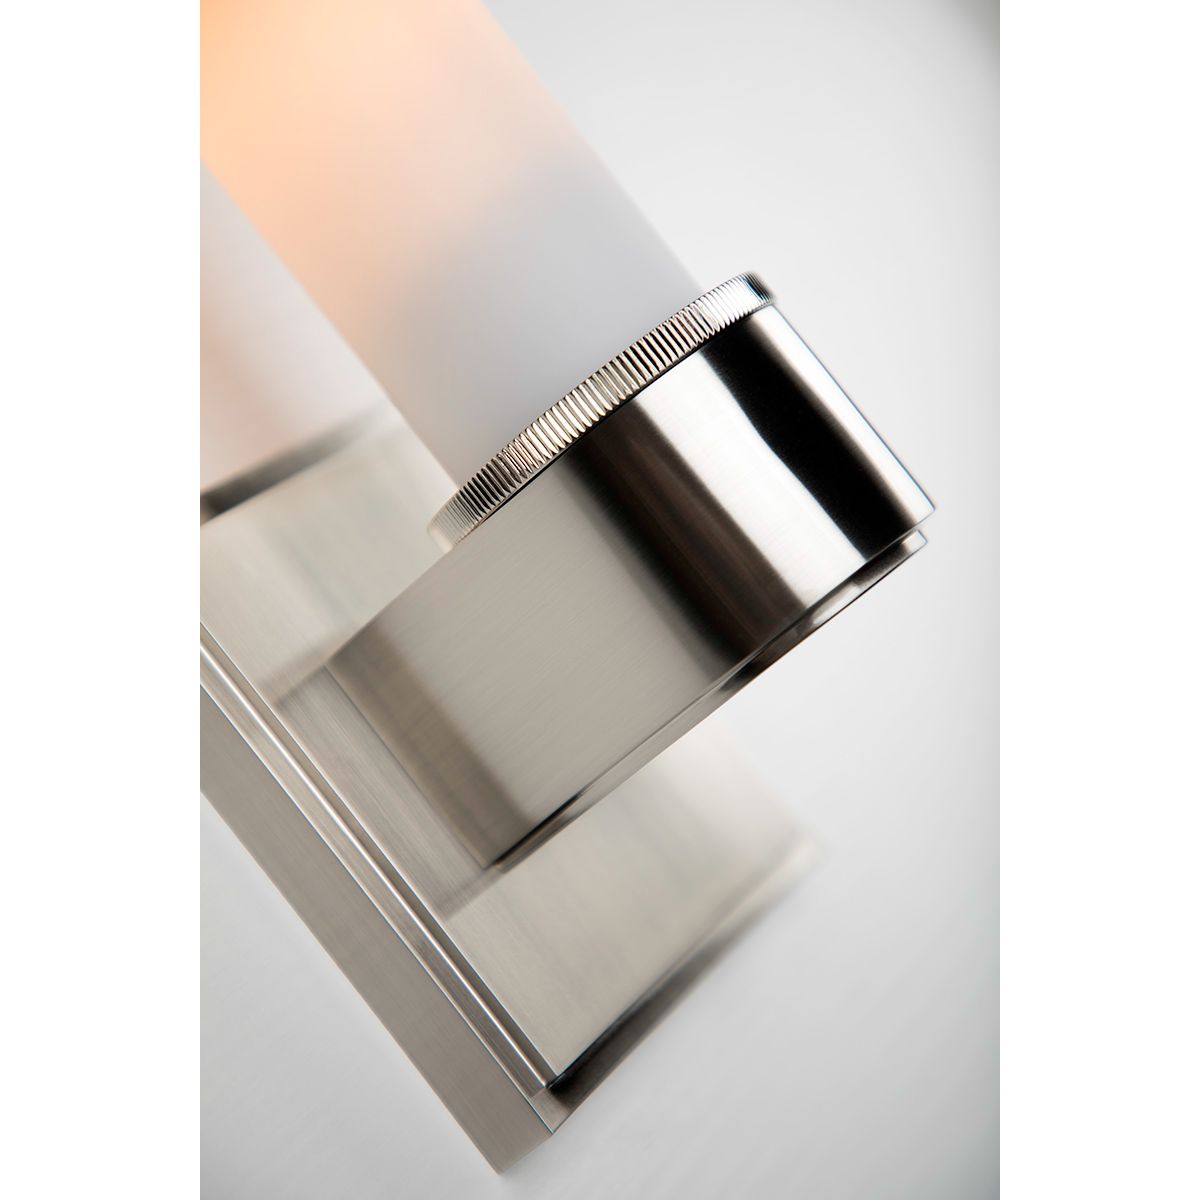 Mill Valley 20 in. 2 Lights Flush Mount Sconce - Bees Lighting